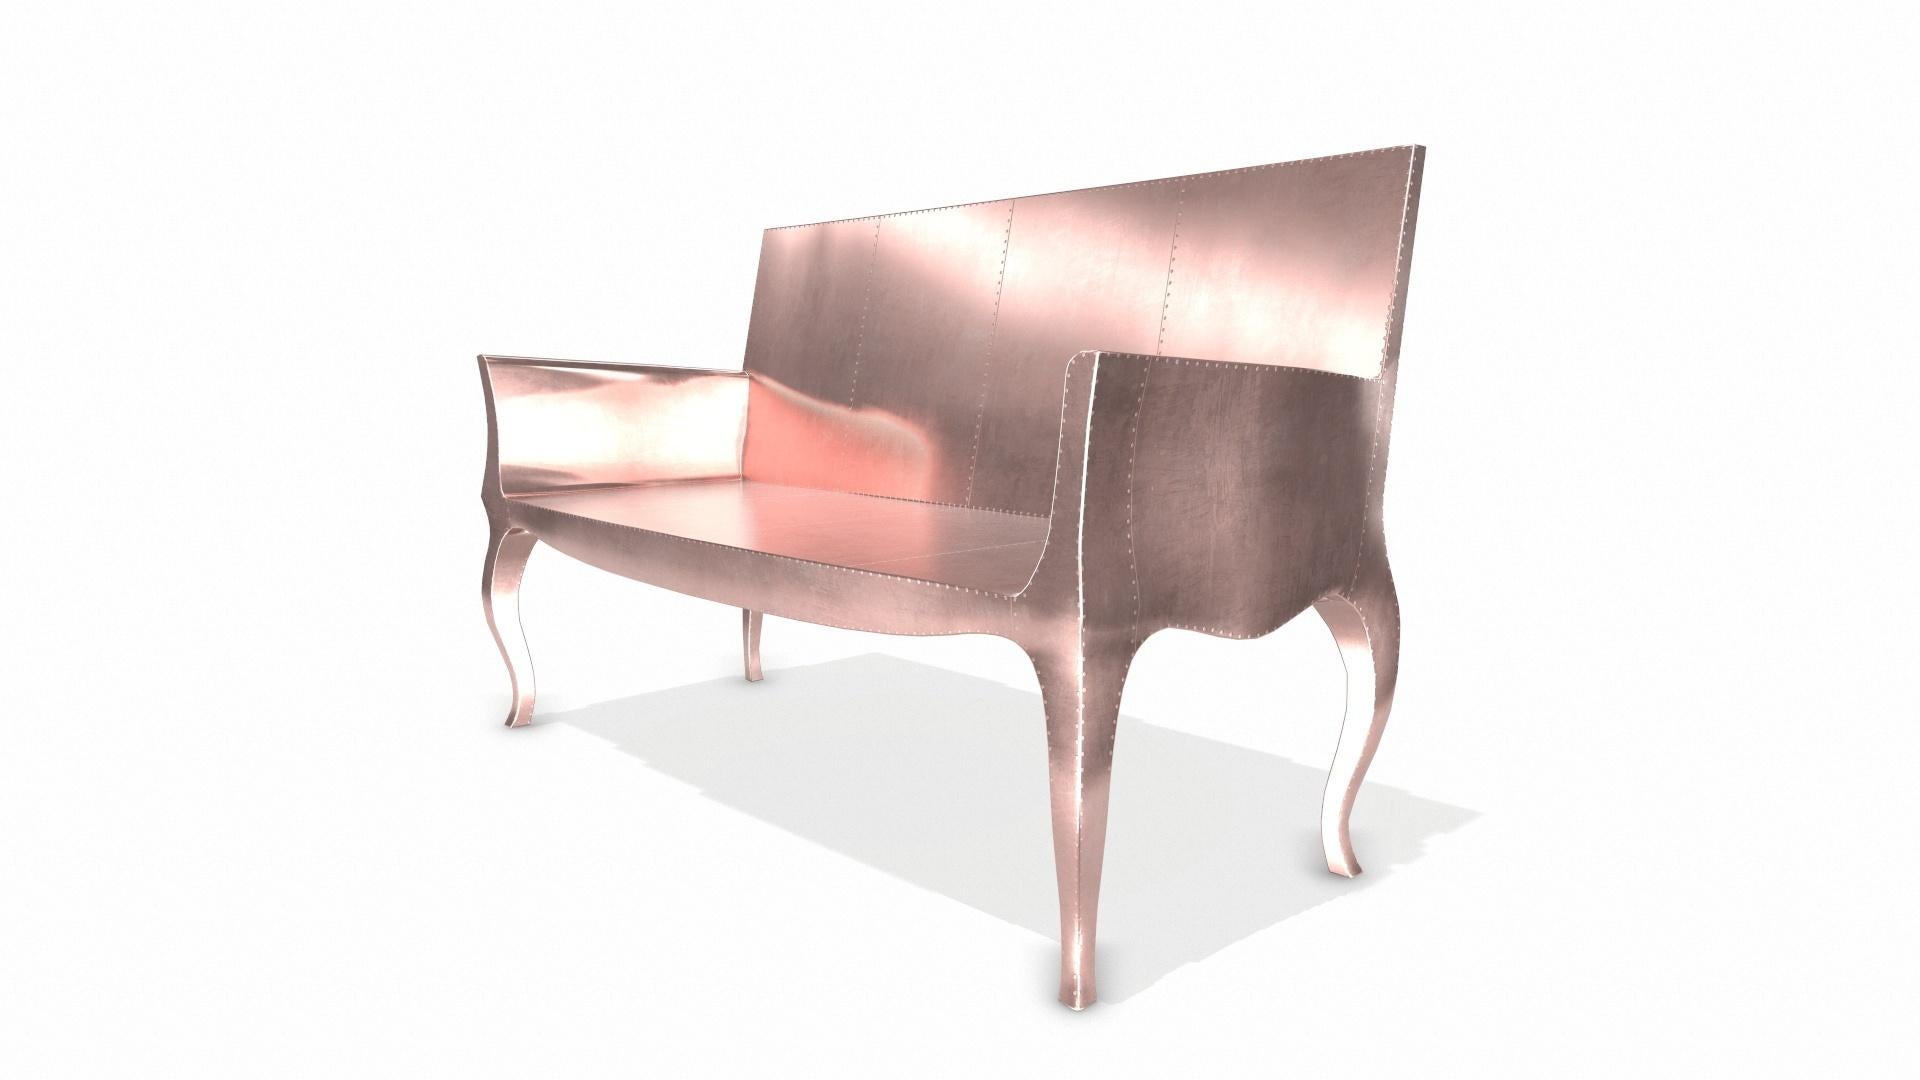 Hand-Crafted Louise Settee Art Deco Daybeds in Smooth Copper by Paul Mathieu For S Odegard  For Sale